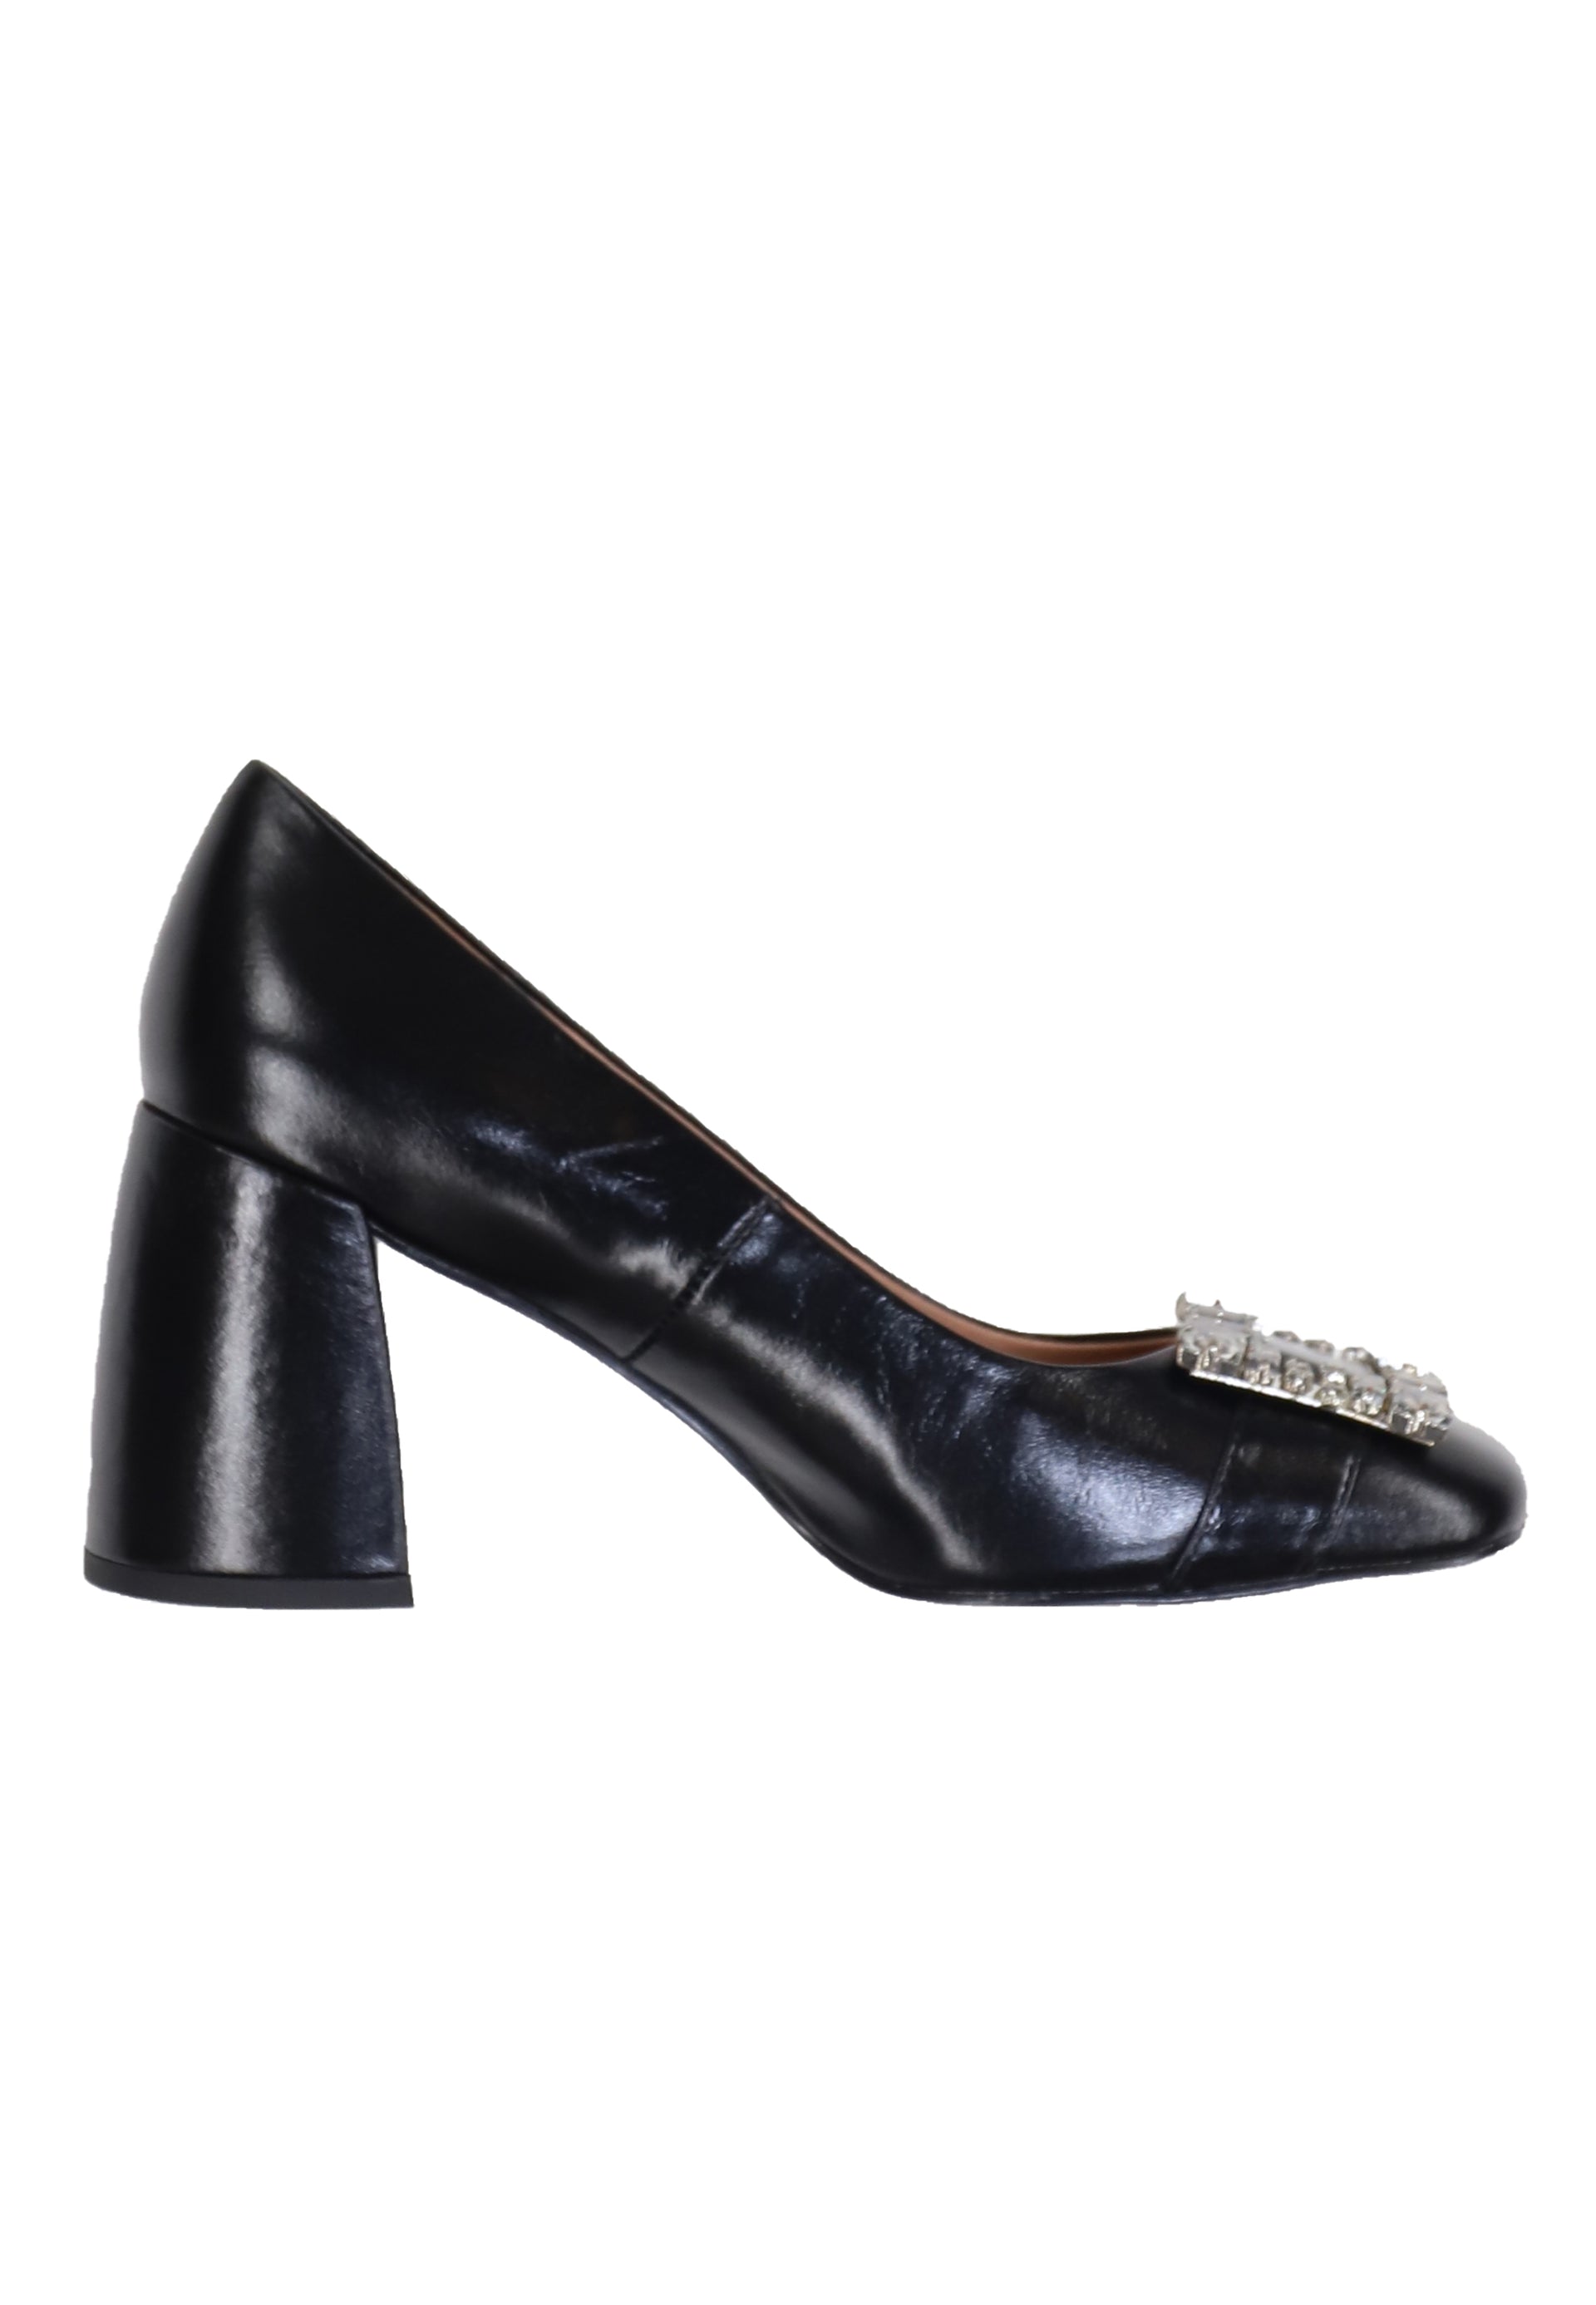 Women's pumps in black shiny leather with rhinestone buckle and Adella high heel